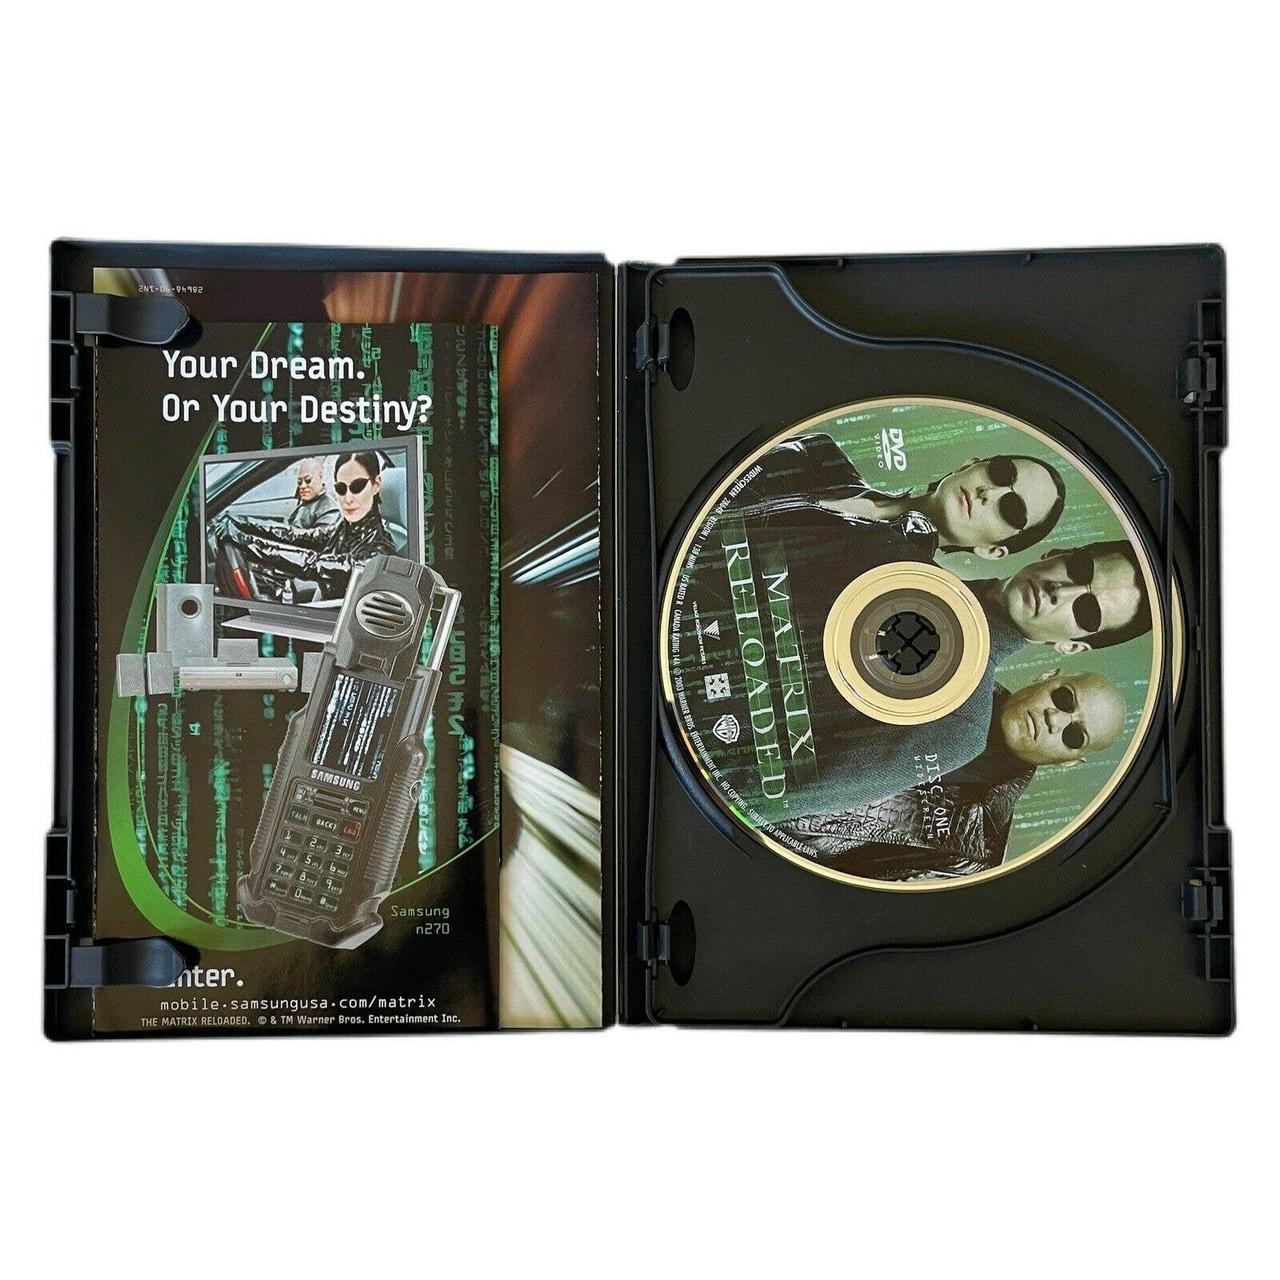 Product Image 2 - The Matrix Reloaded (DVD, 2003).